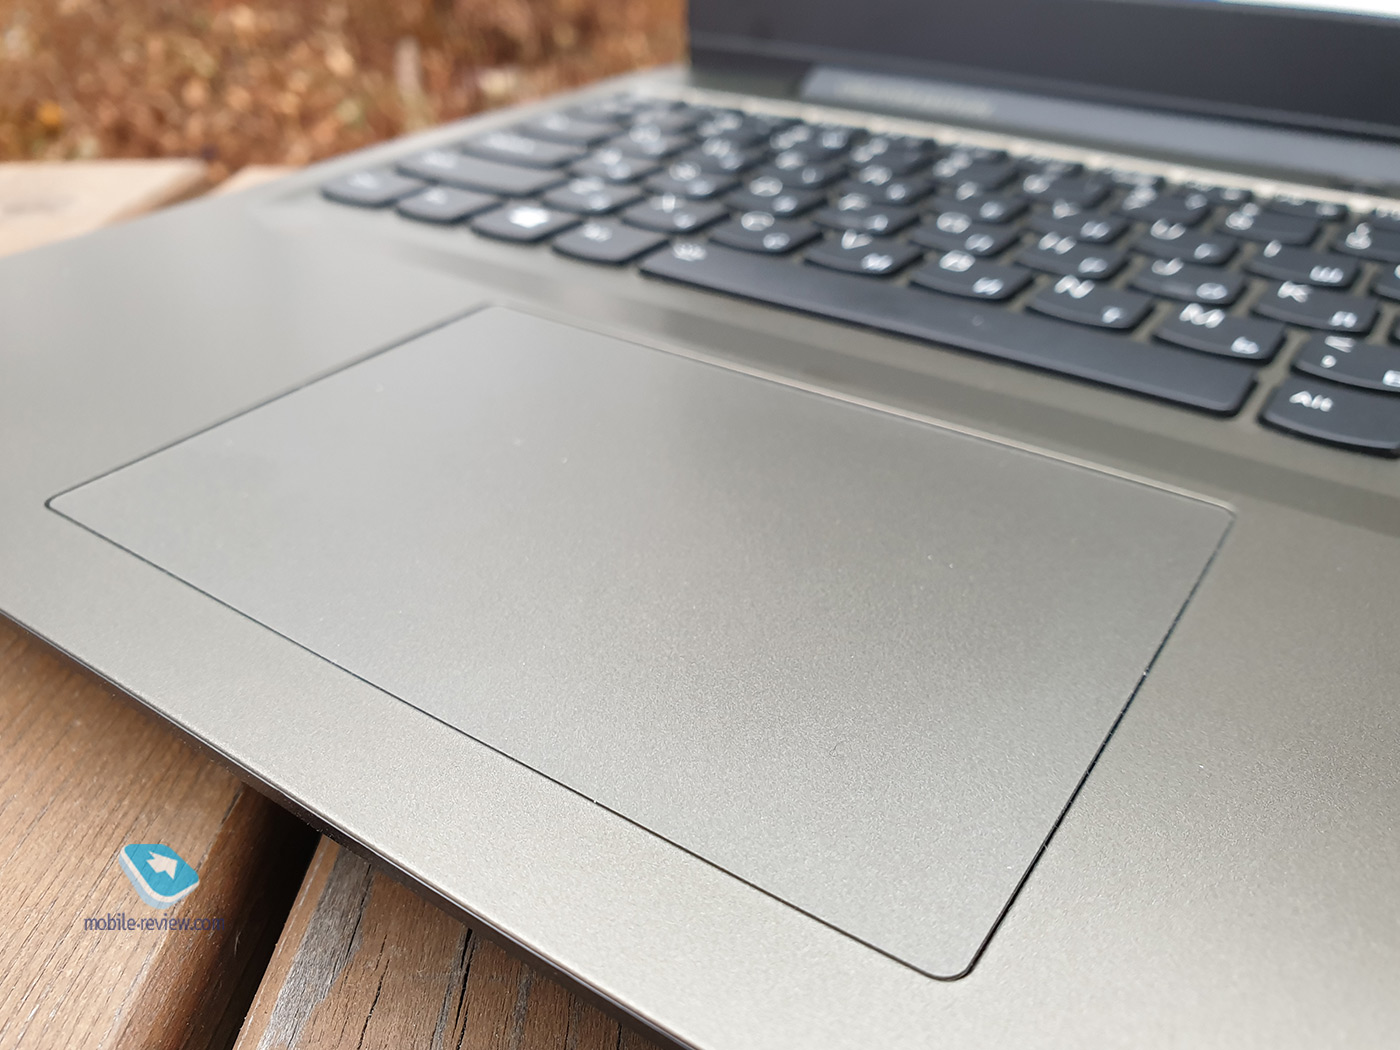 Lenovo IdeaPad Creator 5i: an affordable laptop with a high-end display